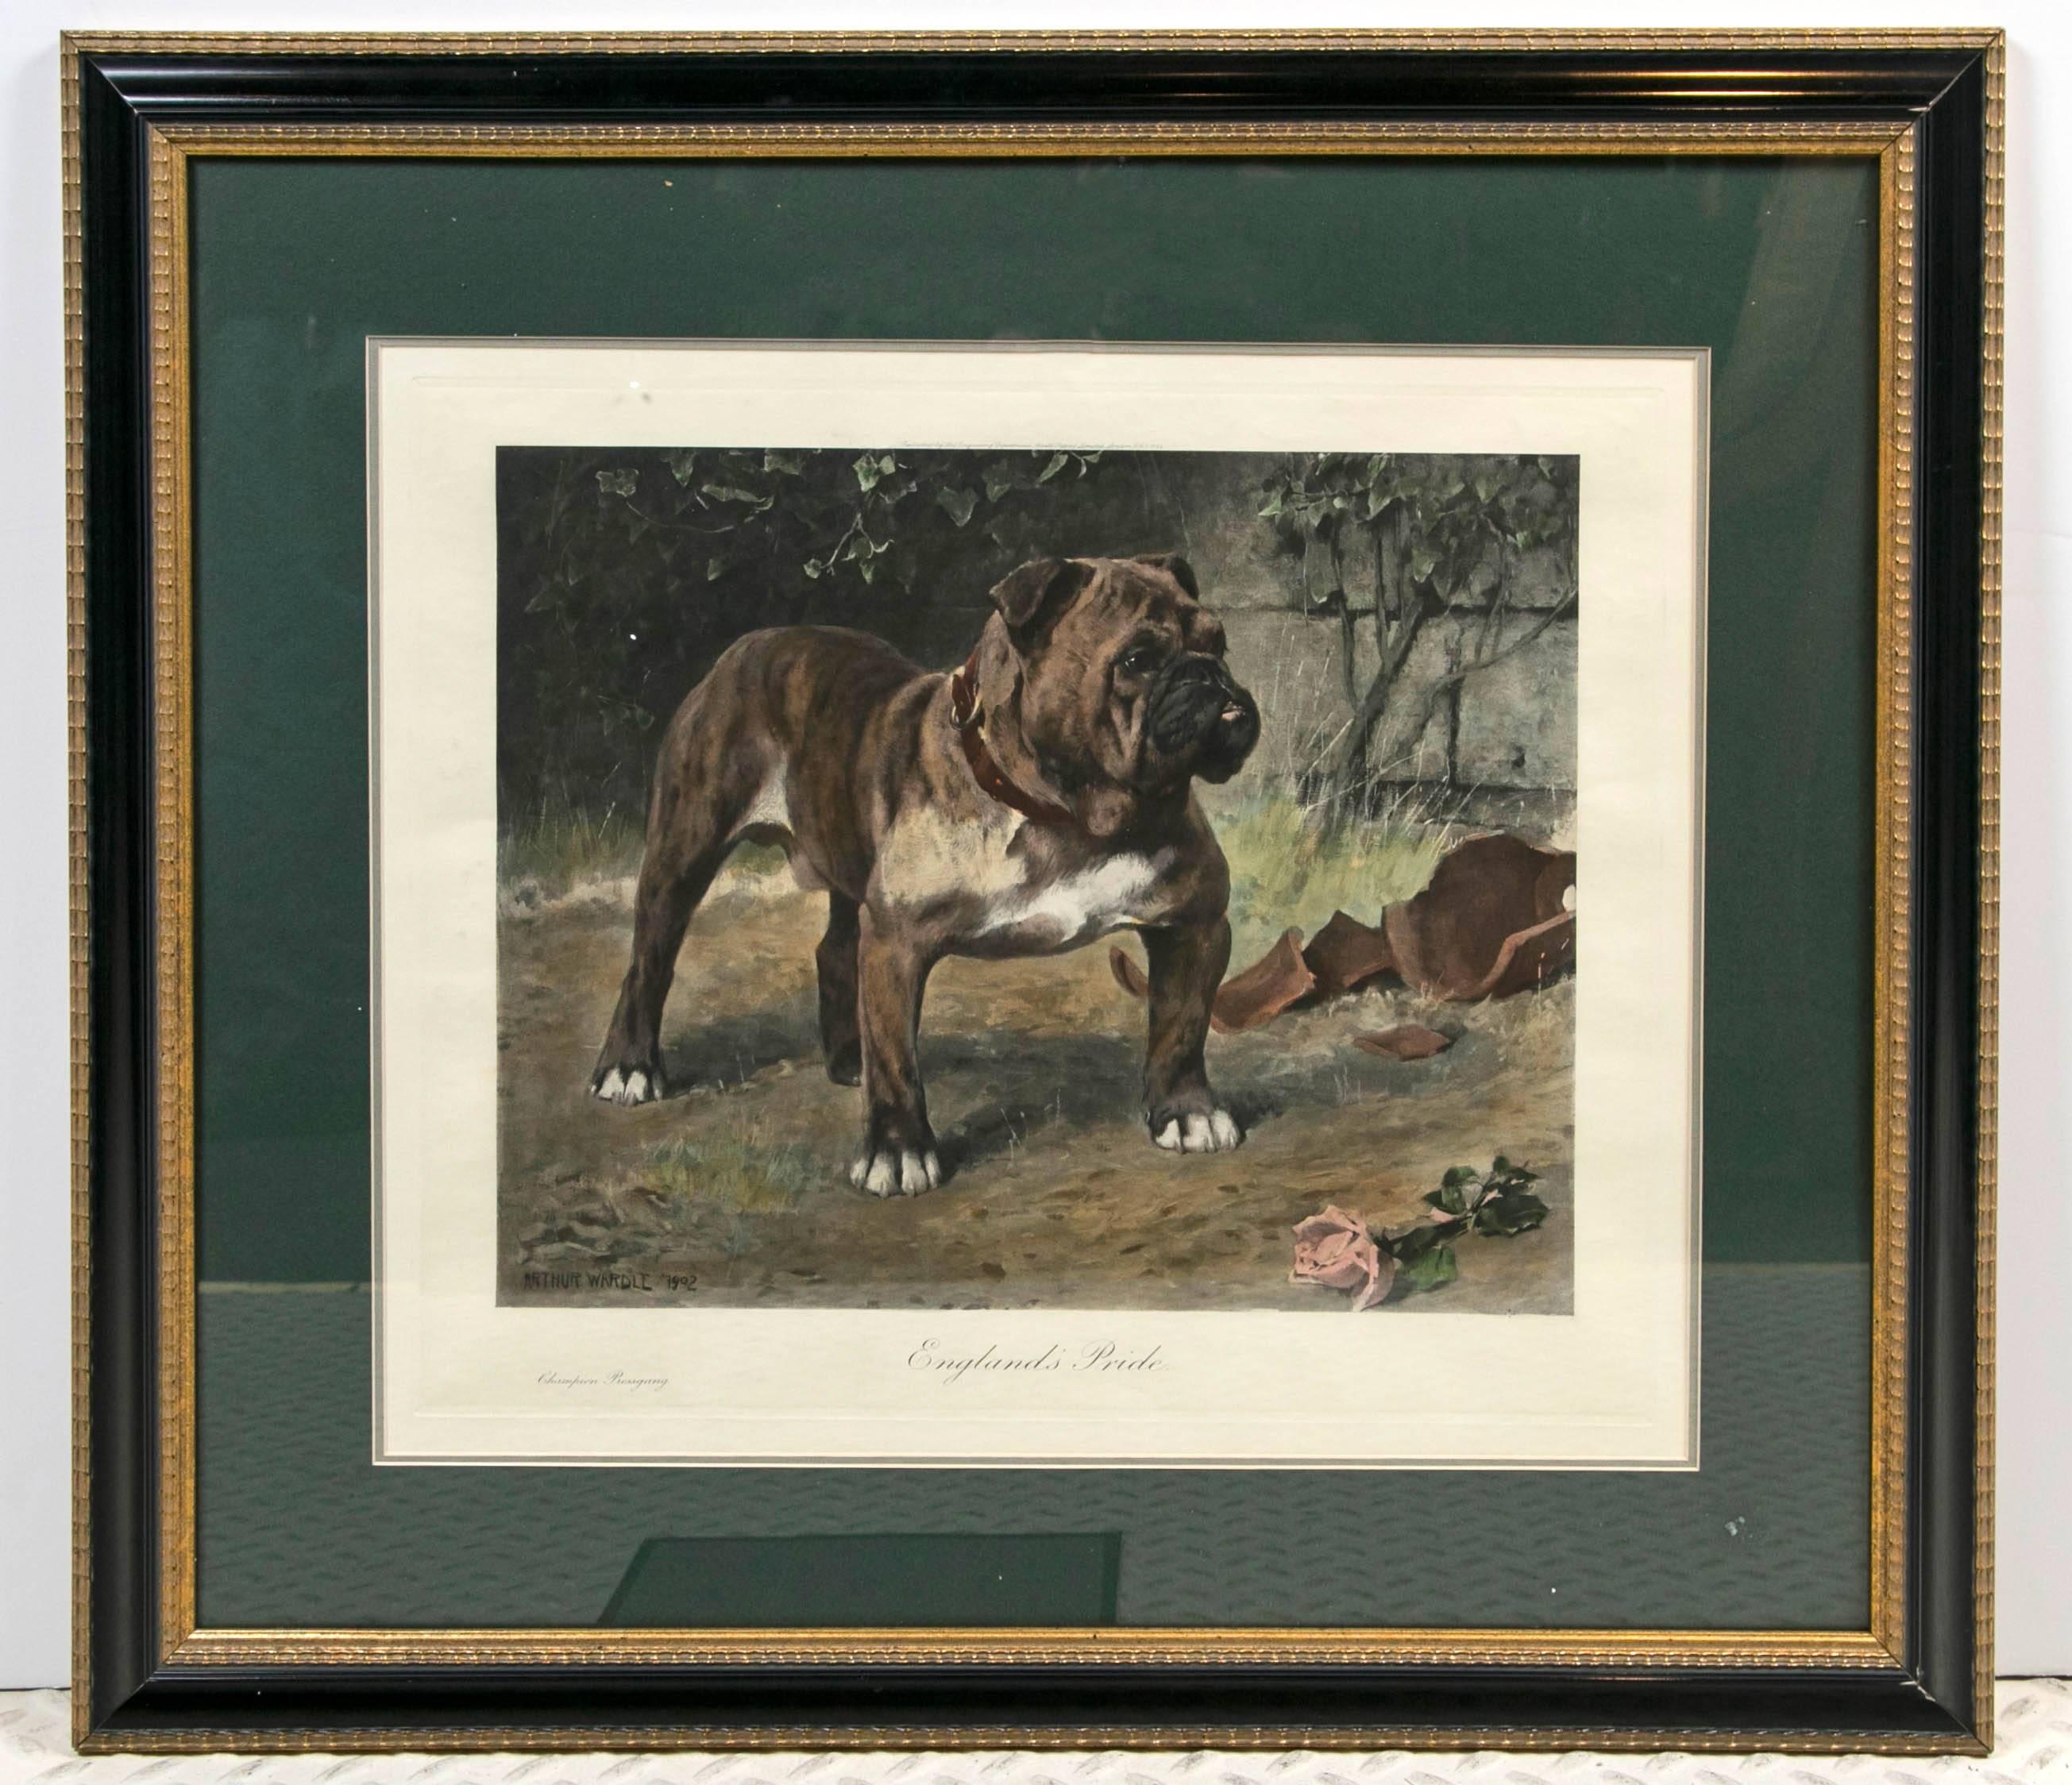 This hand colored restrike etching art print of Arthur Wardle's 